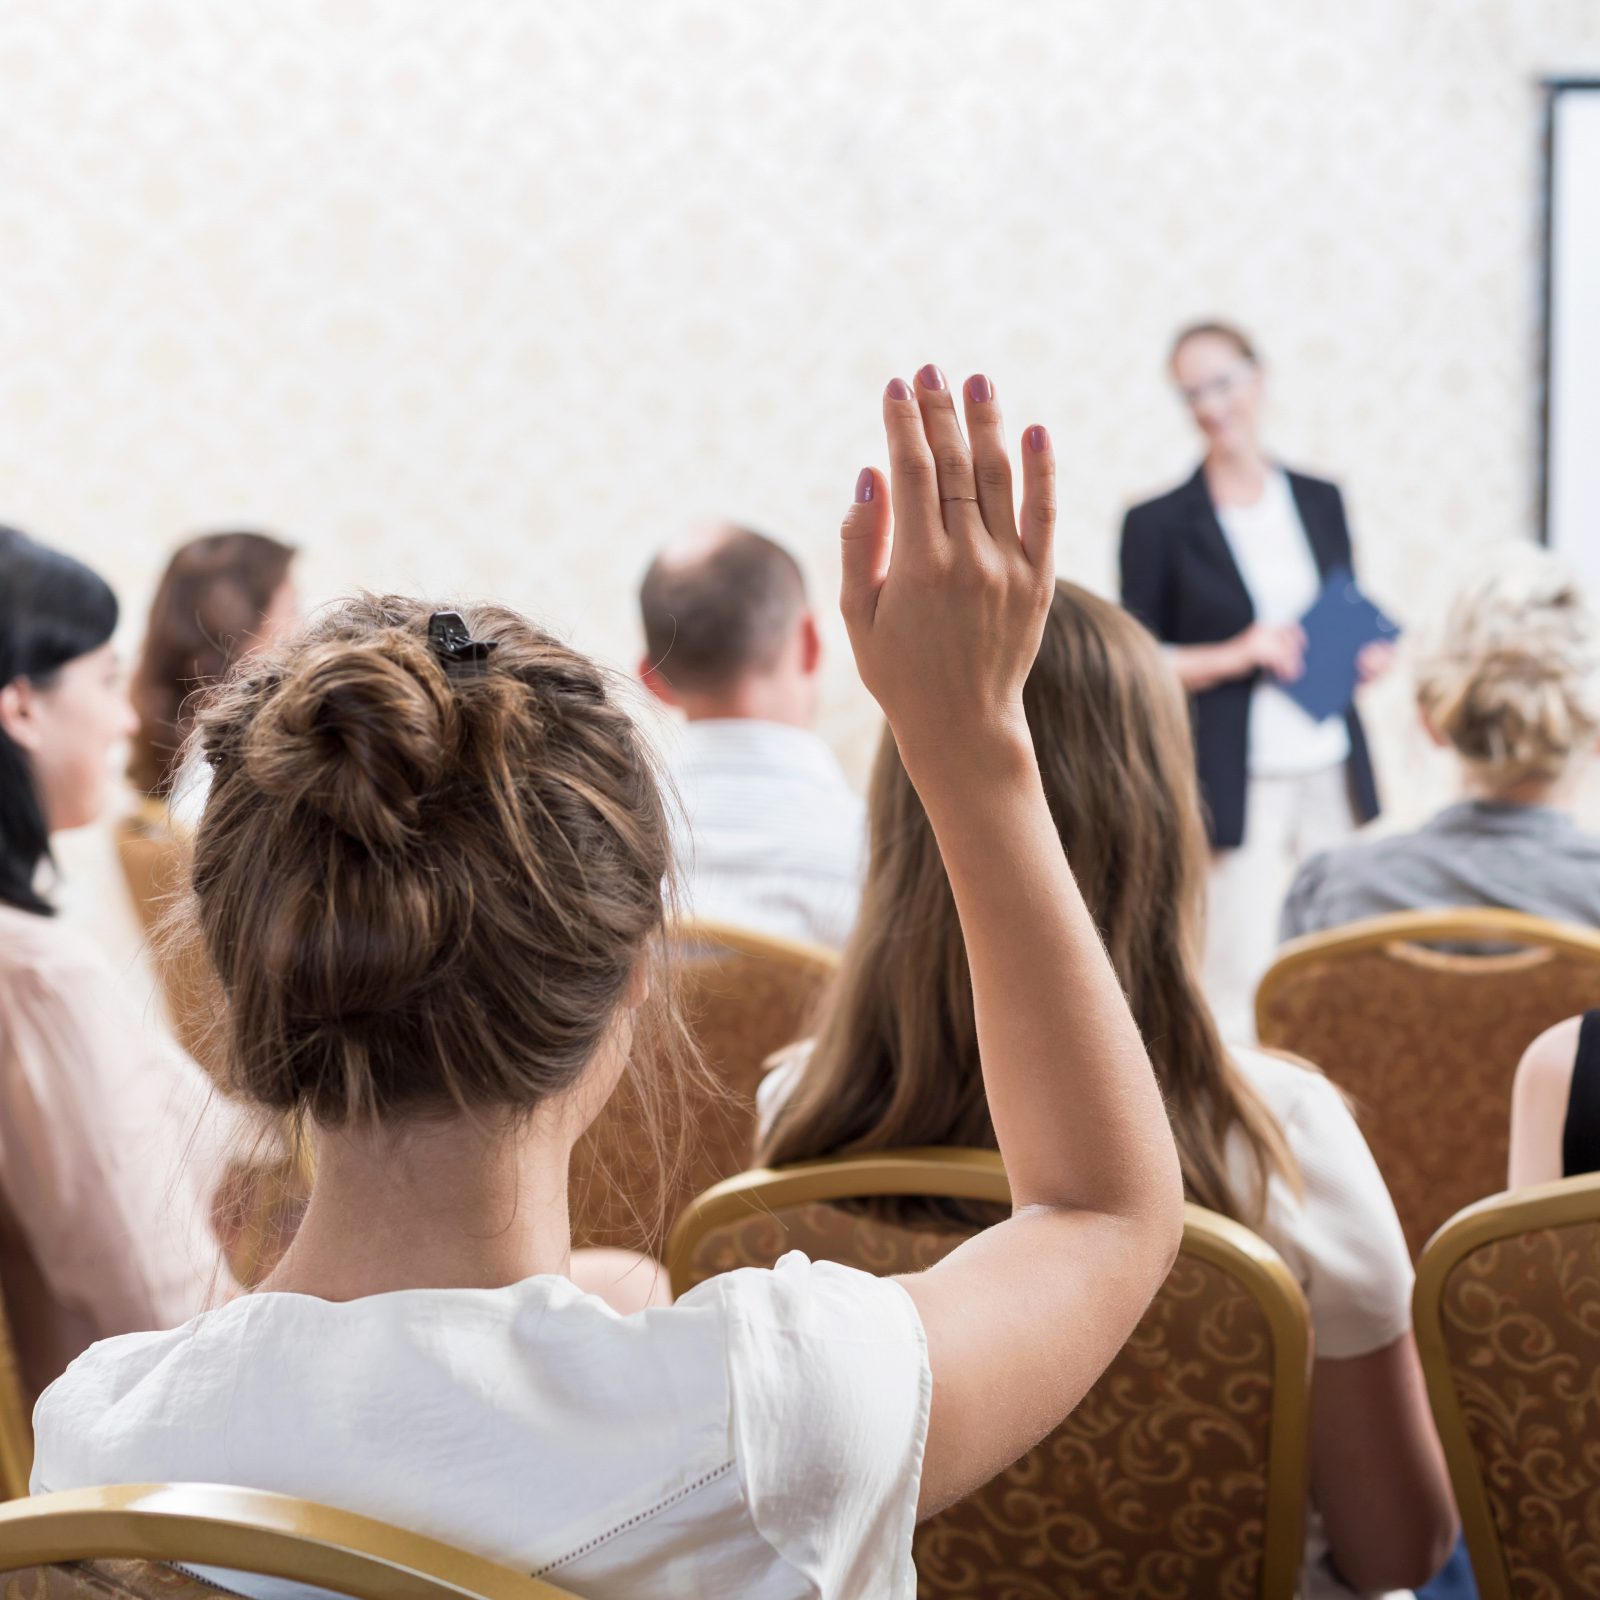 Photo of listener raising hand to ask question during seminar